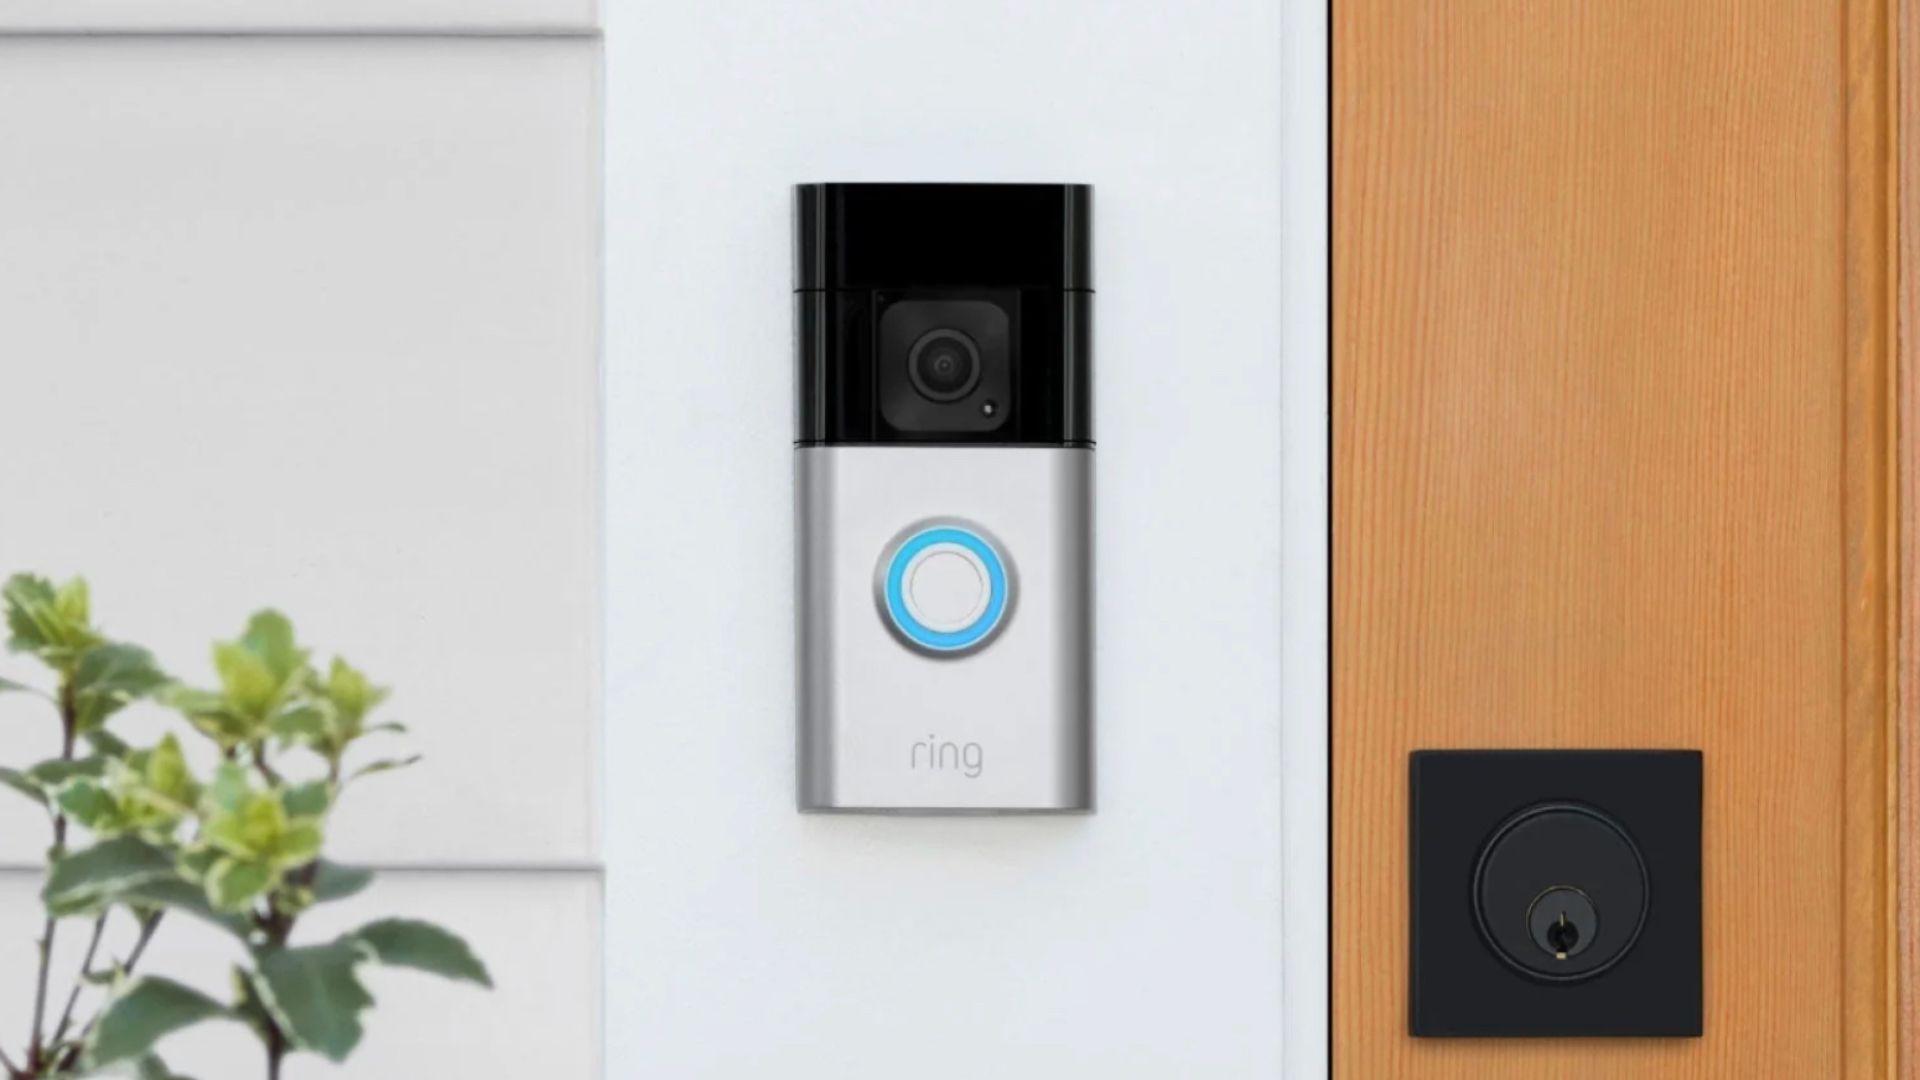 ring video doorbell installed on a house.